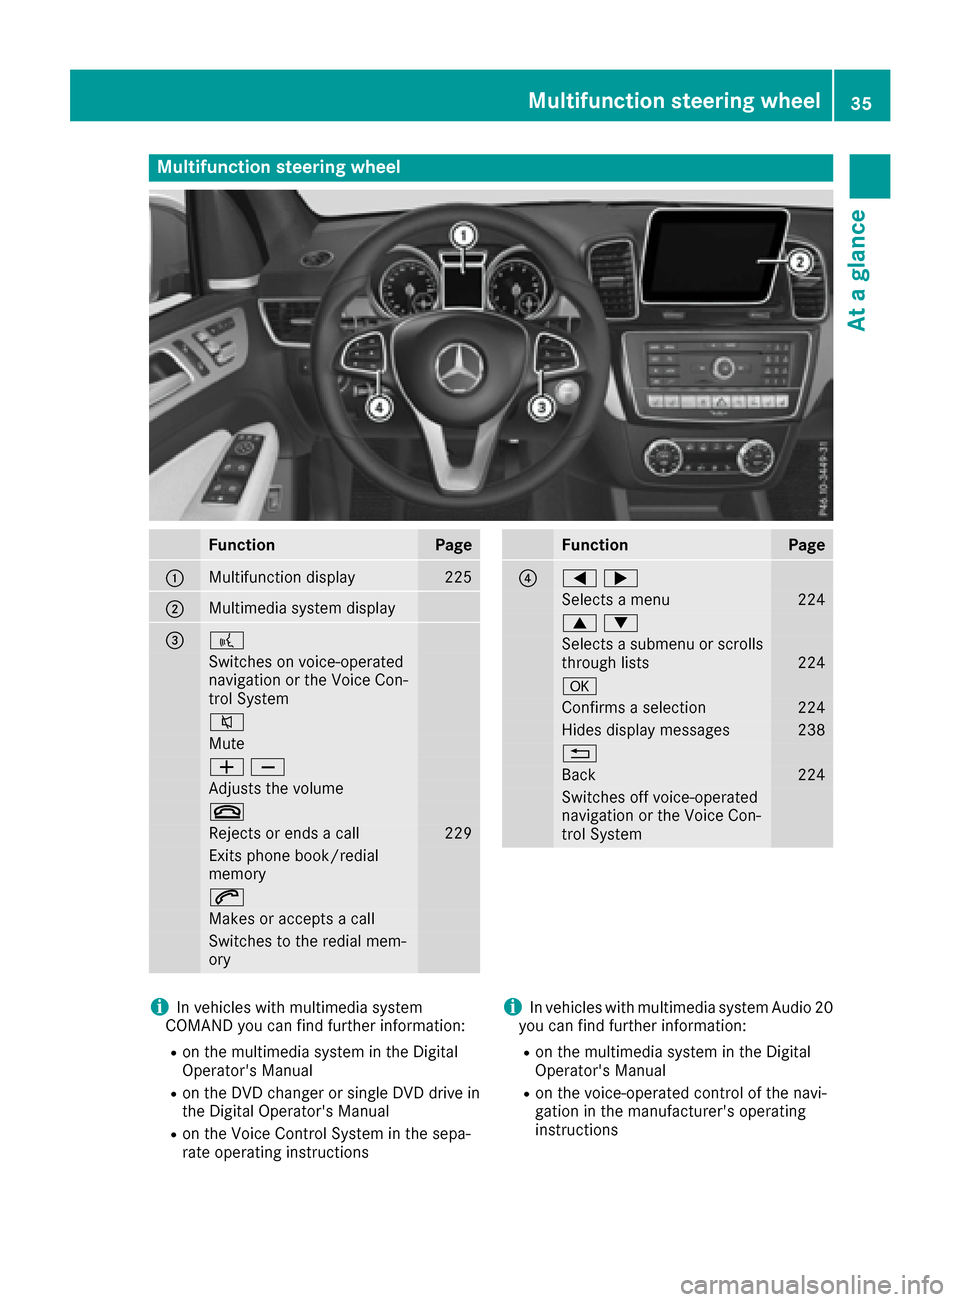 MERCEDES-BENZ GLE SUV 2017 W166 Owners Guide Multifunction steering wheel
FunctionPage
:Multifunction display225
;Multimedia system display
=?
Switches on voice-operated
navigation or the Voice Con-
trol System
8
Mute
WX
Adjusts the volume
~
Rej